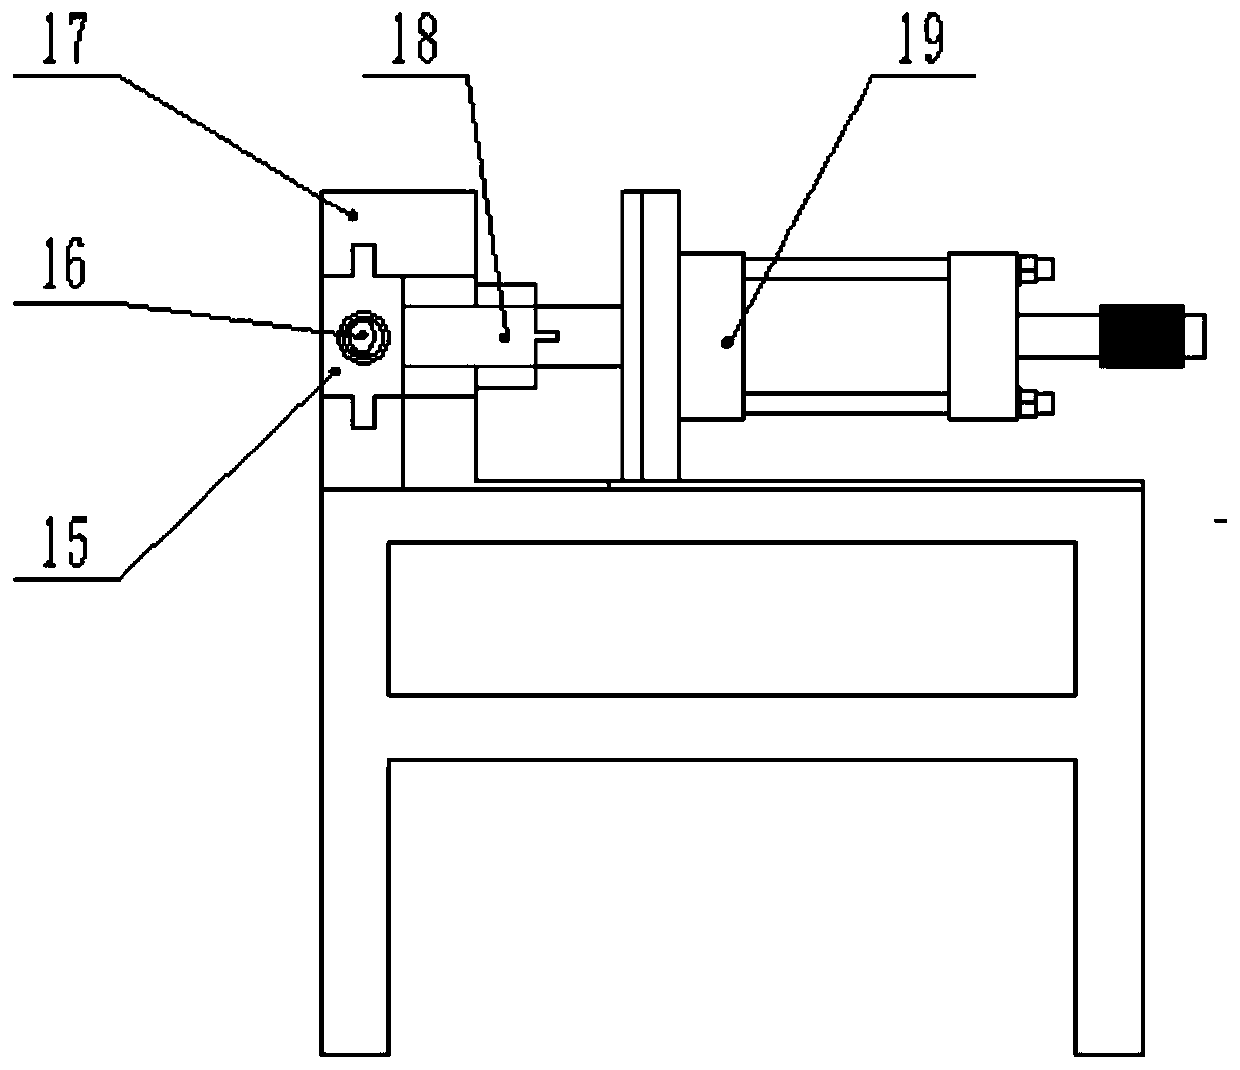 An automatic punching device and method for double-intersecting lines of circular tubes